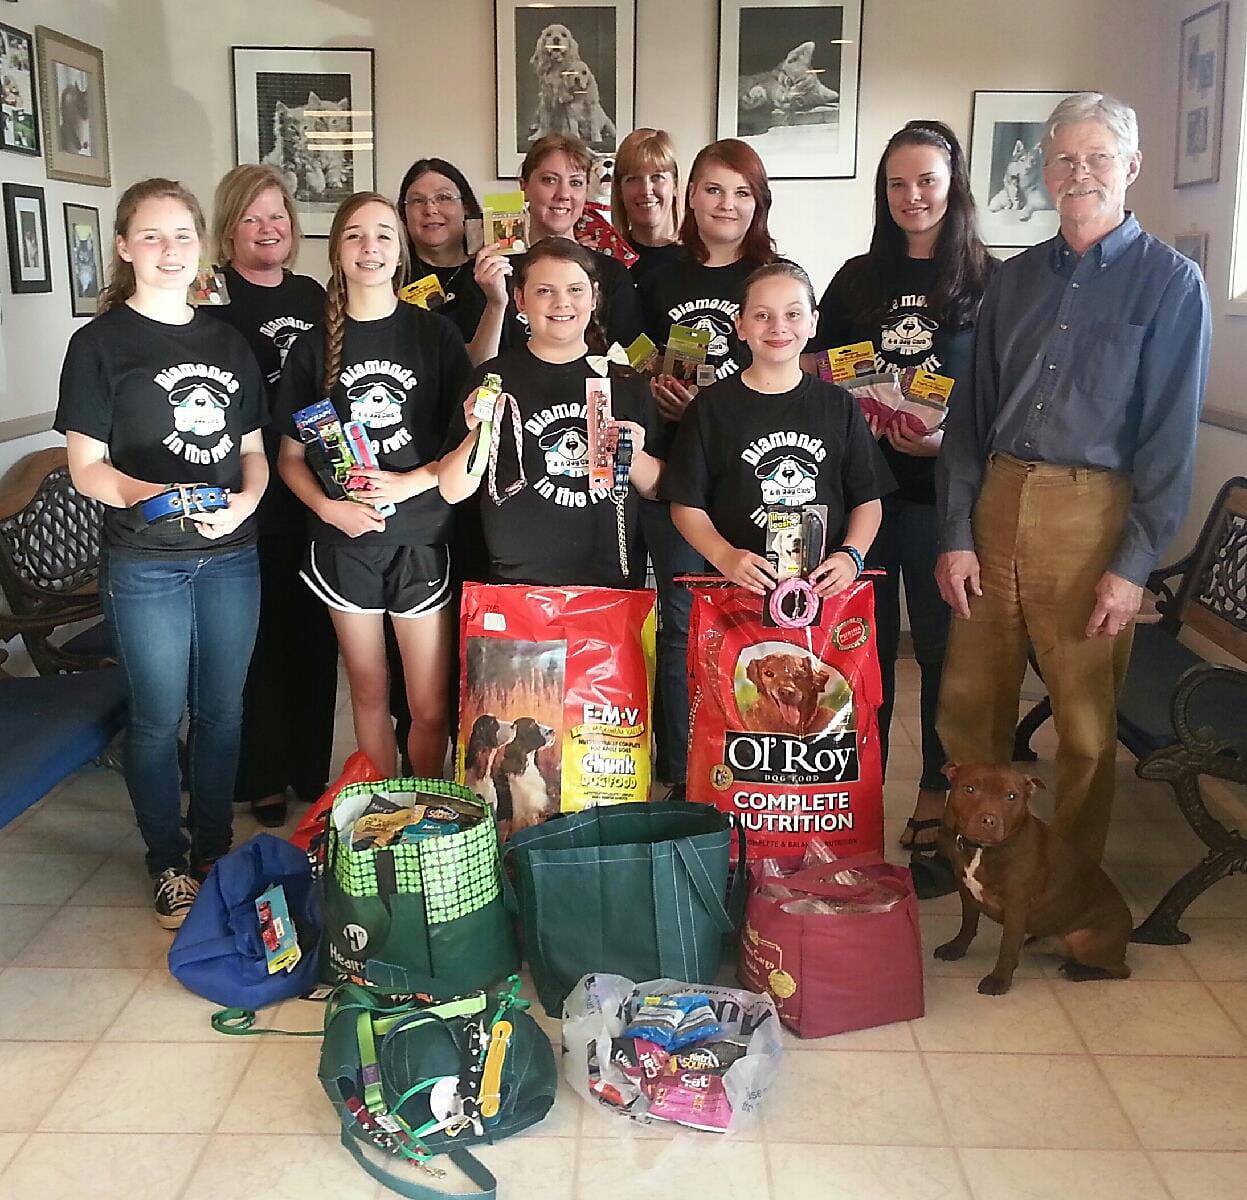 Hazel Dell: The Diamonds in the Ruff 4-H Club recently makes a donation to the Hazel Dell Animal Hospital. Front row, from left: Alyssa Selfridge, Sarah Whetsell, Megan Whetsell, McKenna Miltenberger and veterinarian David Slocum.